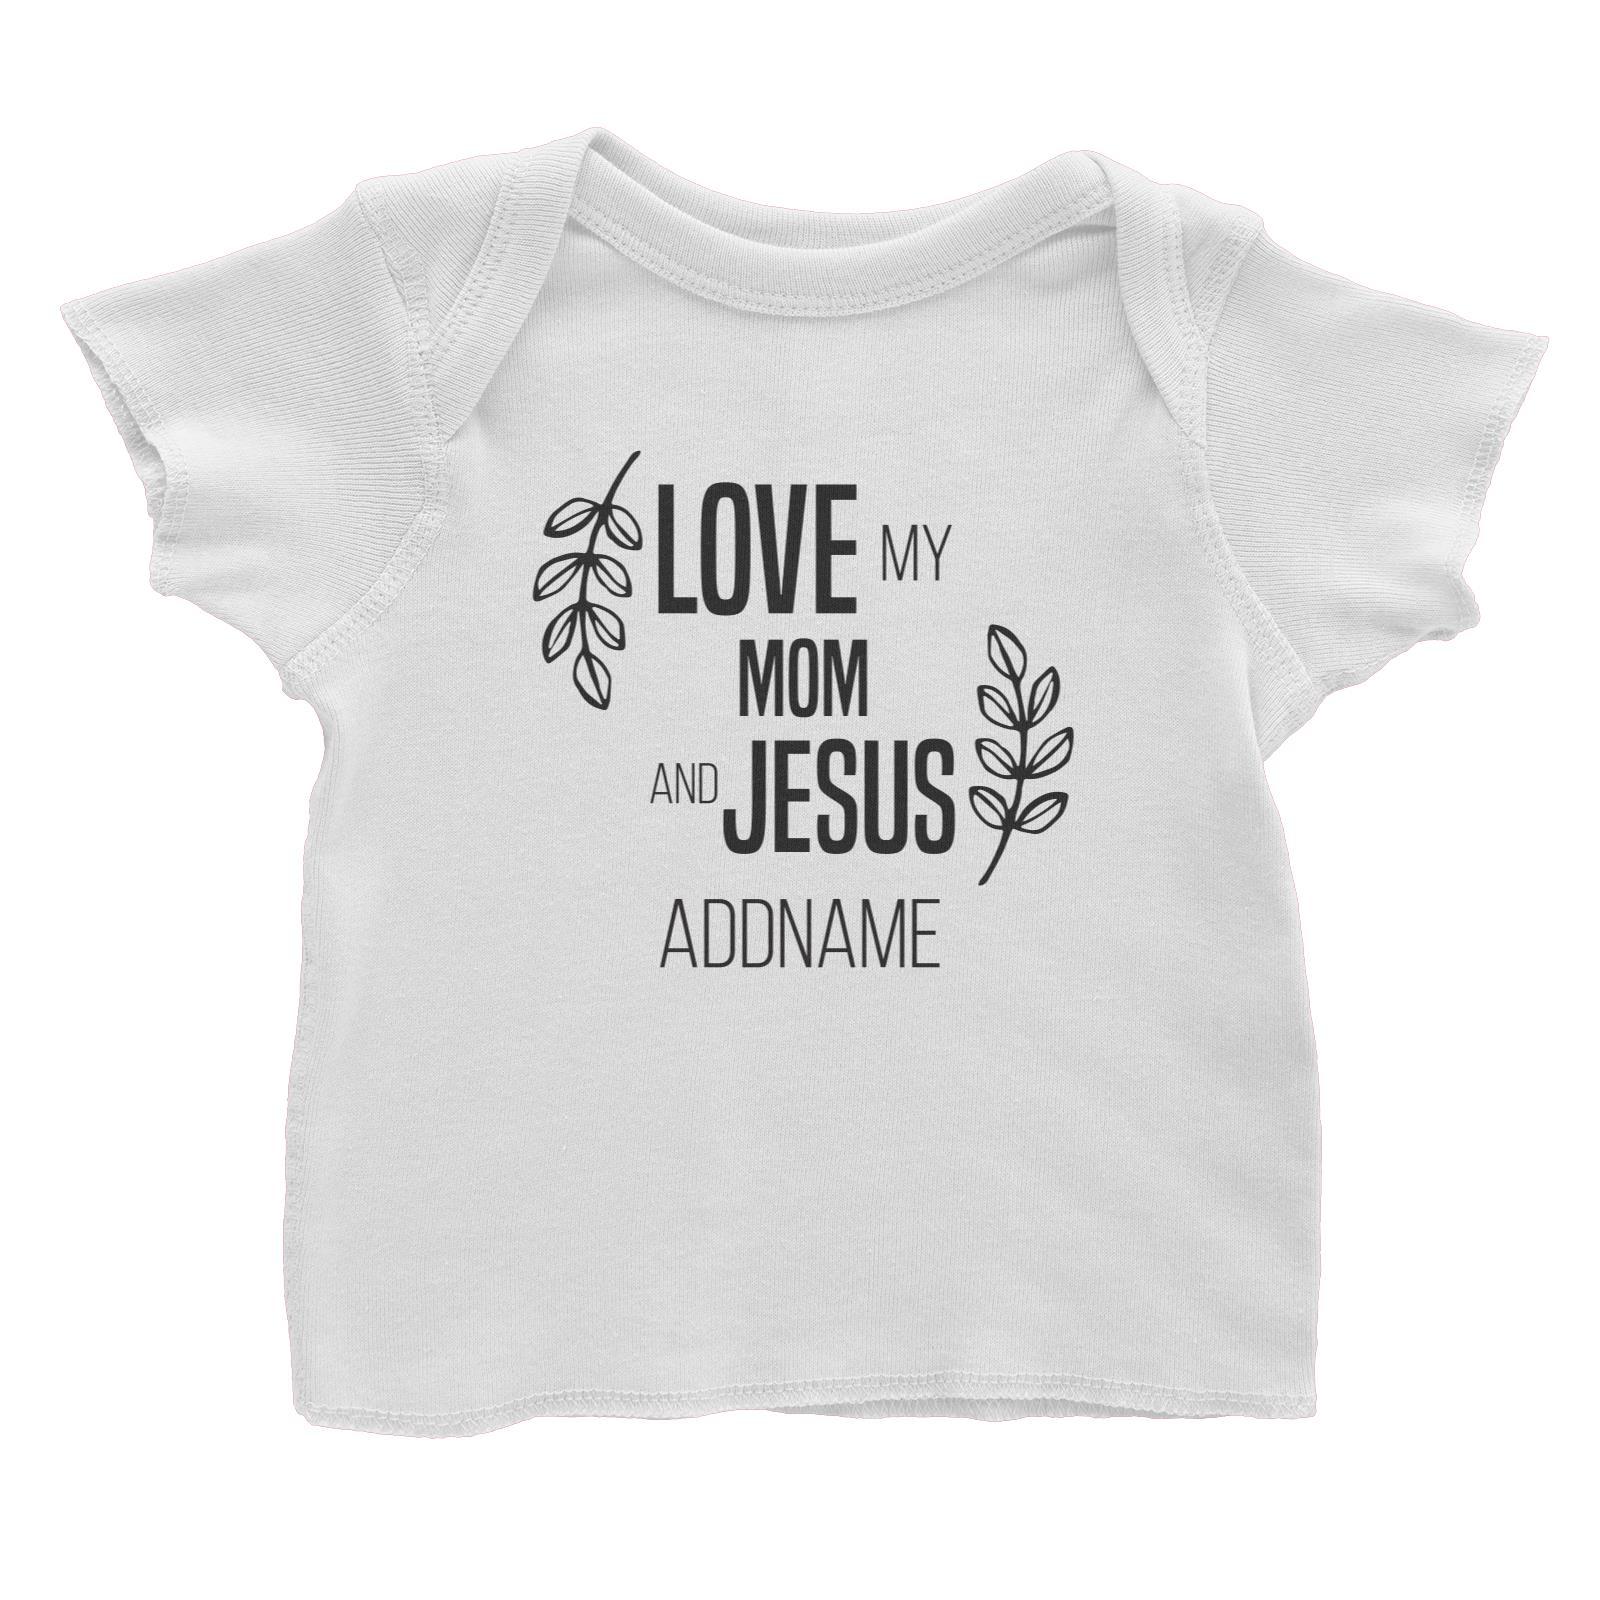 Christian Series Love My Mom And Jesus Addname Baby T-Shirt